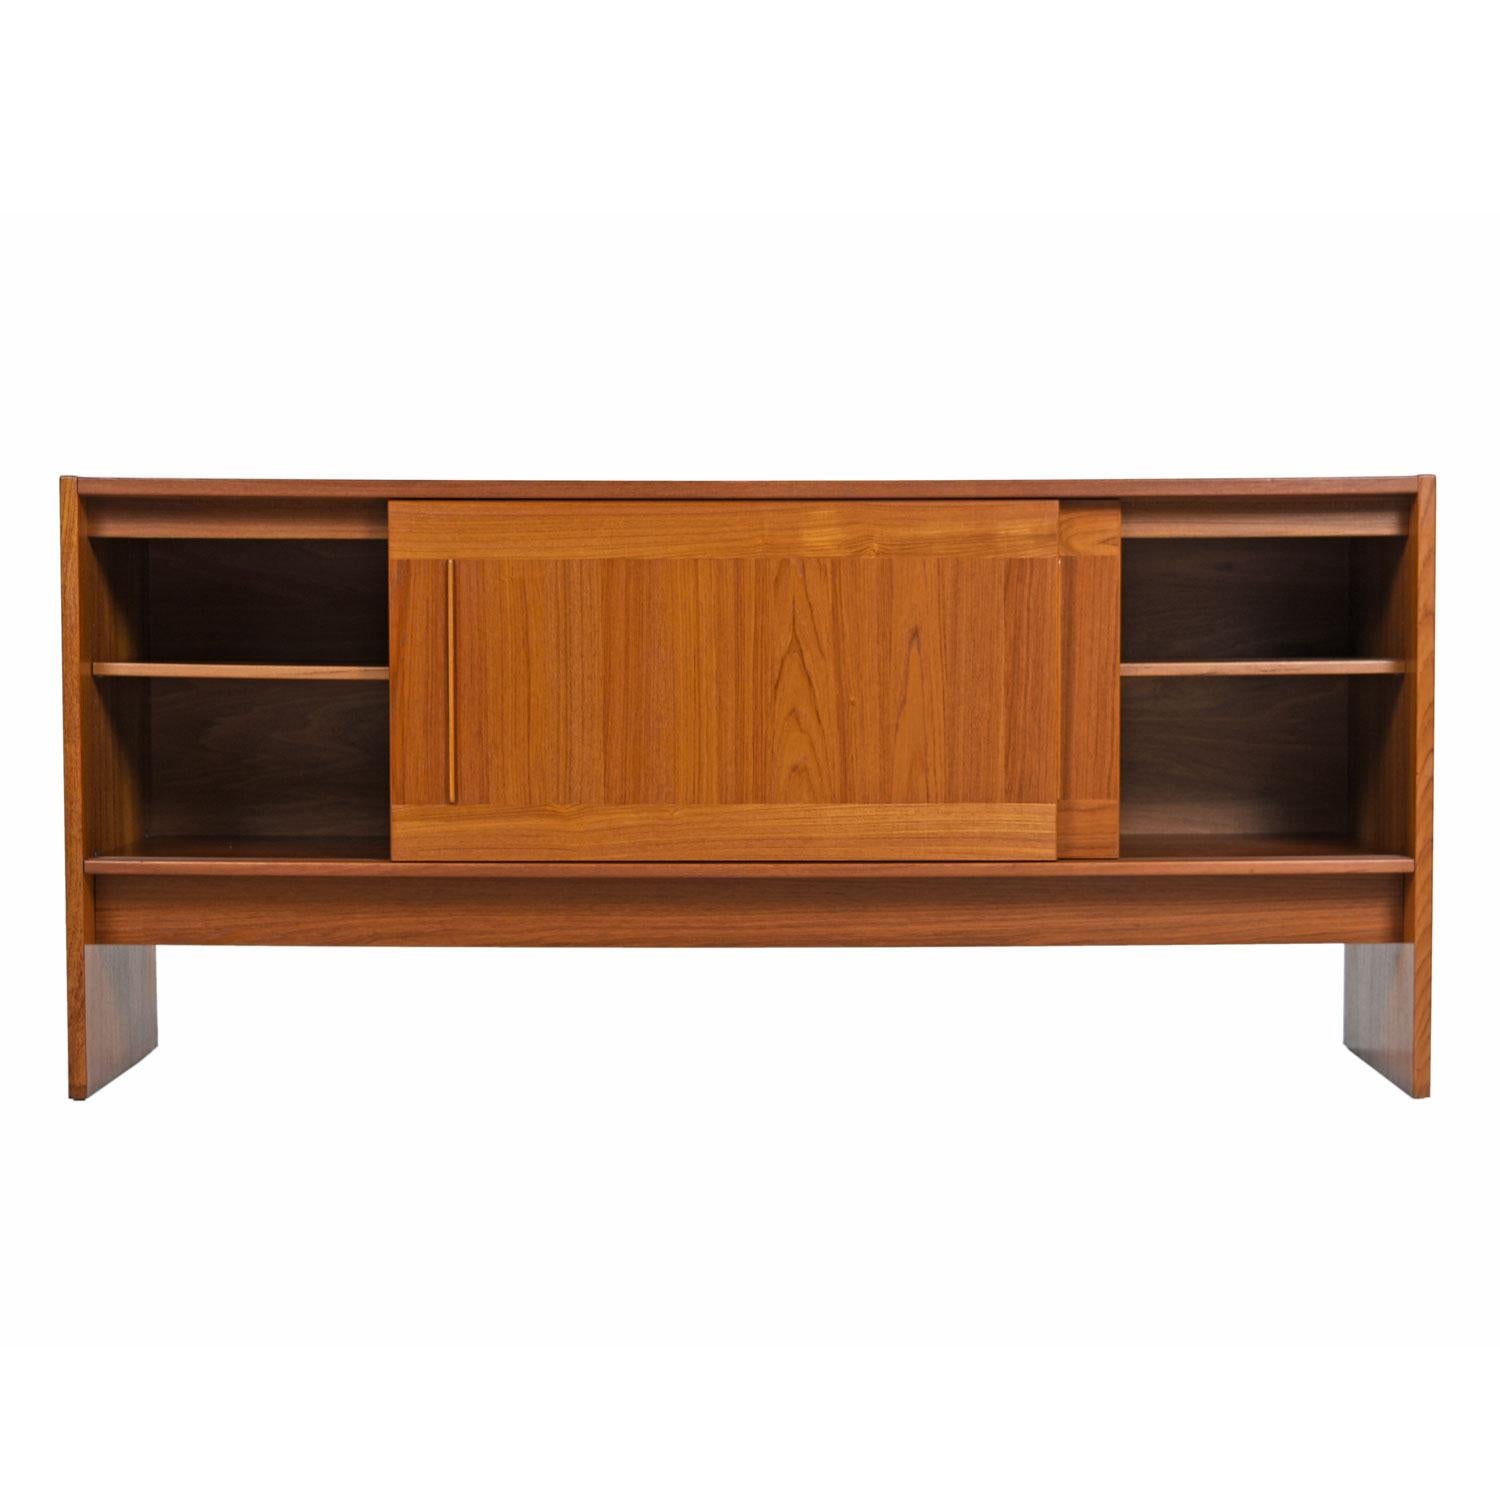 Late 20th Century Danish Teak Tile-Top Media Cabinet Credenza Buffet Signed by the Artist, 1980s